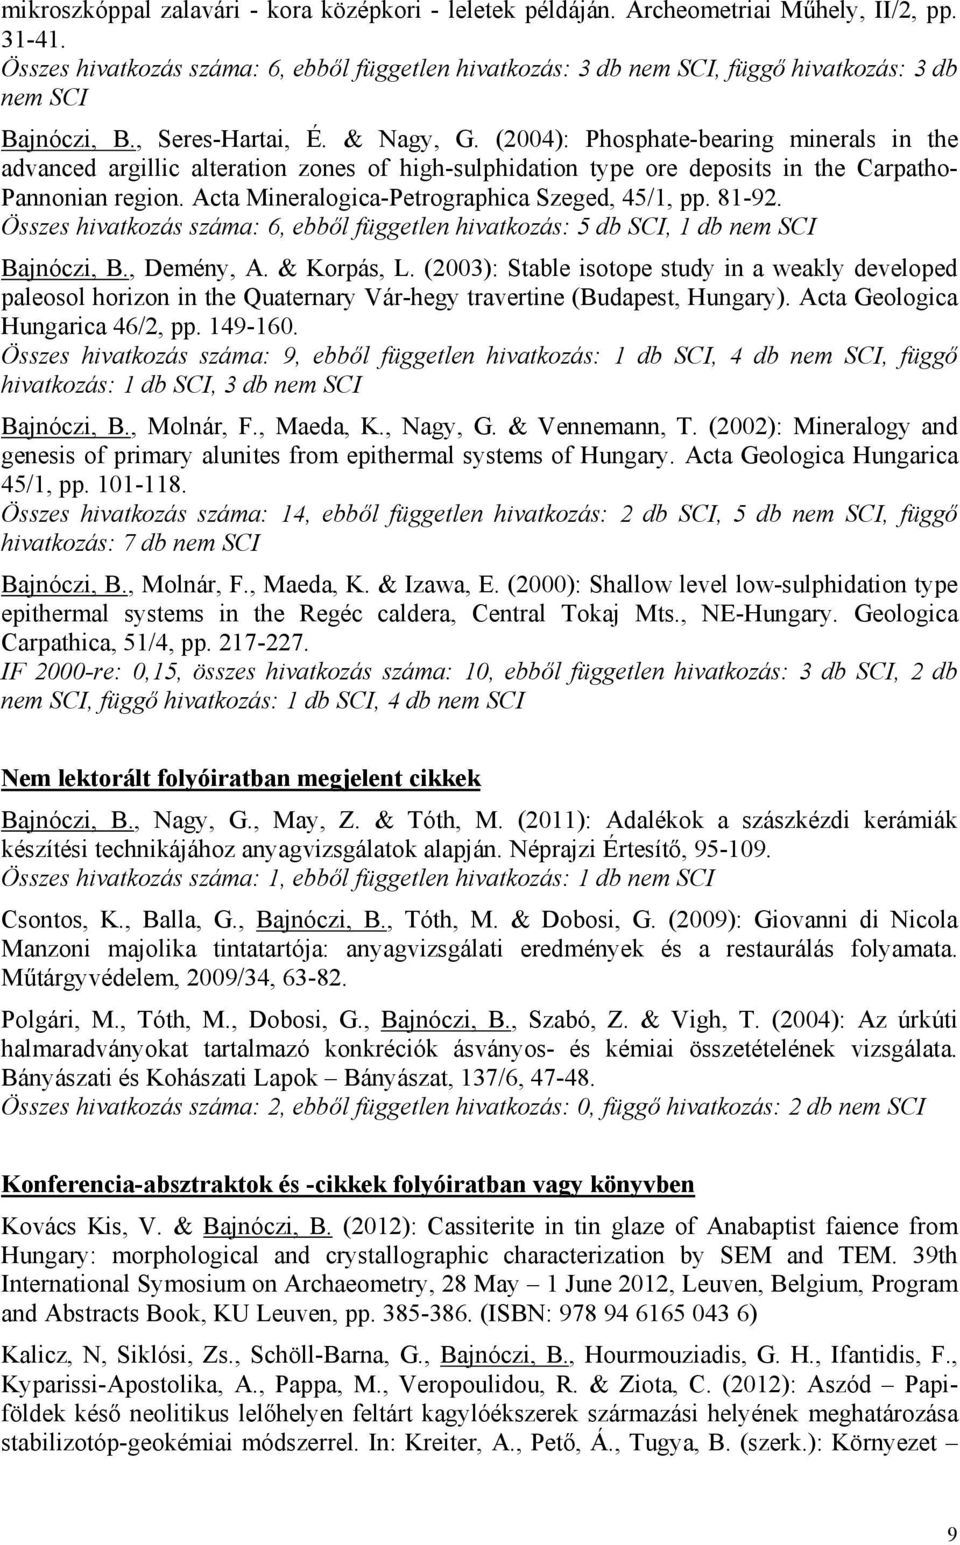 (2004): Phosphate-bearing minerals in the advanced argillic alteration zones of high-sulphidation type ore deposits in the Carpatho- Pannonian region. Acta Mineralogica-Petrographica Szeged, 45/1, pp.